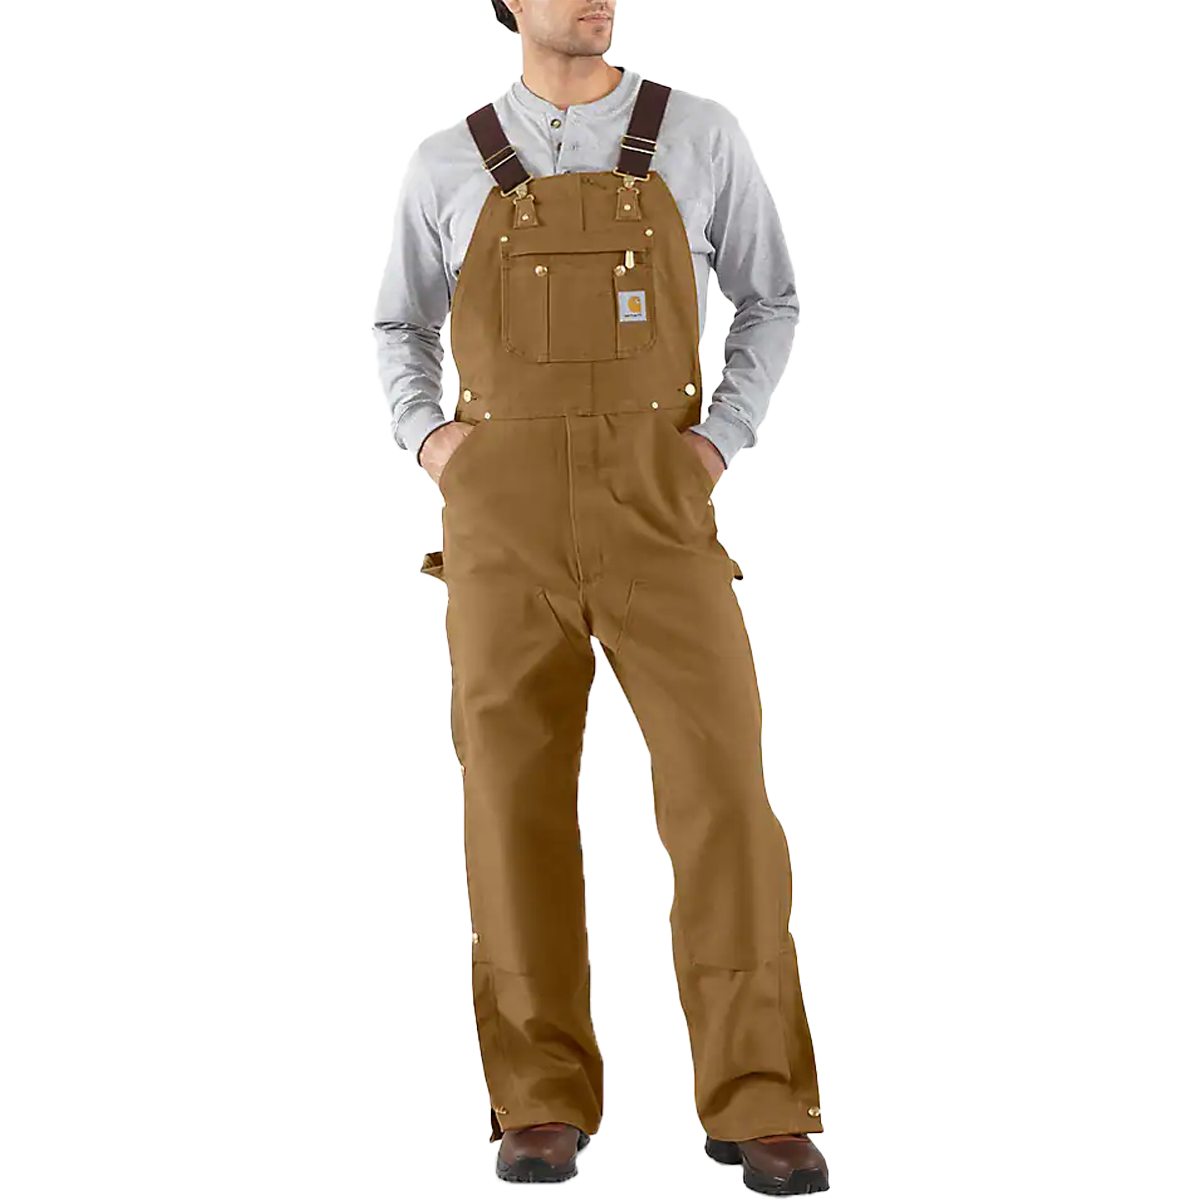 Men's Loose Fit Firm Duck Bib Overall alternate view